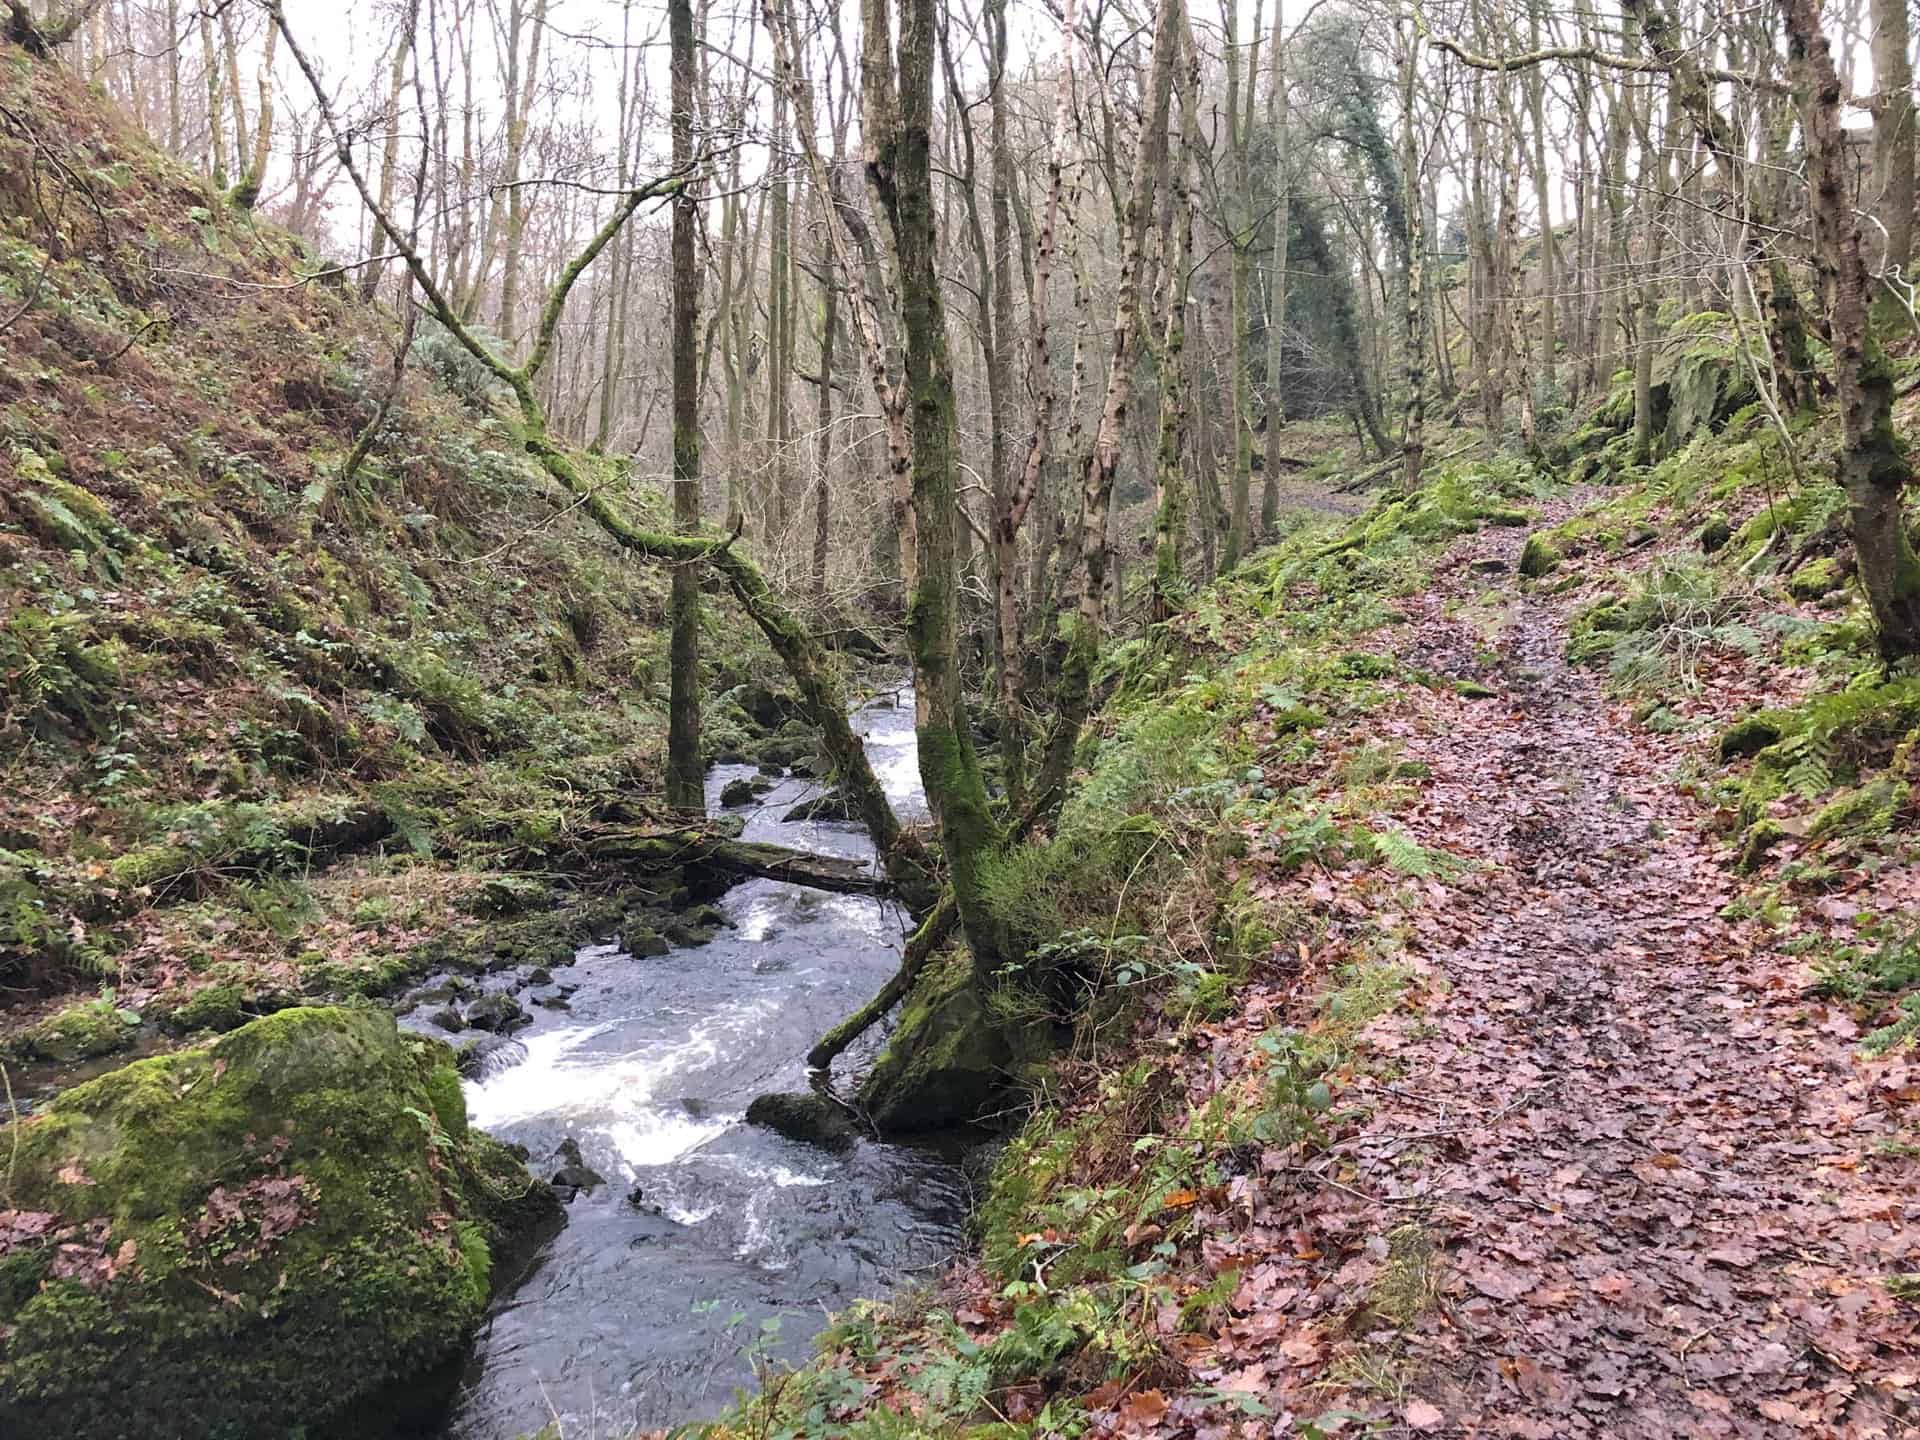 Fell Beck flowing through woodland north of Smelthouses.